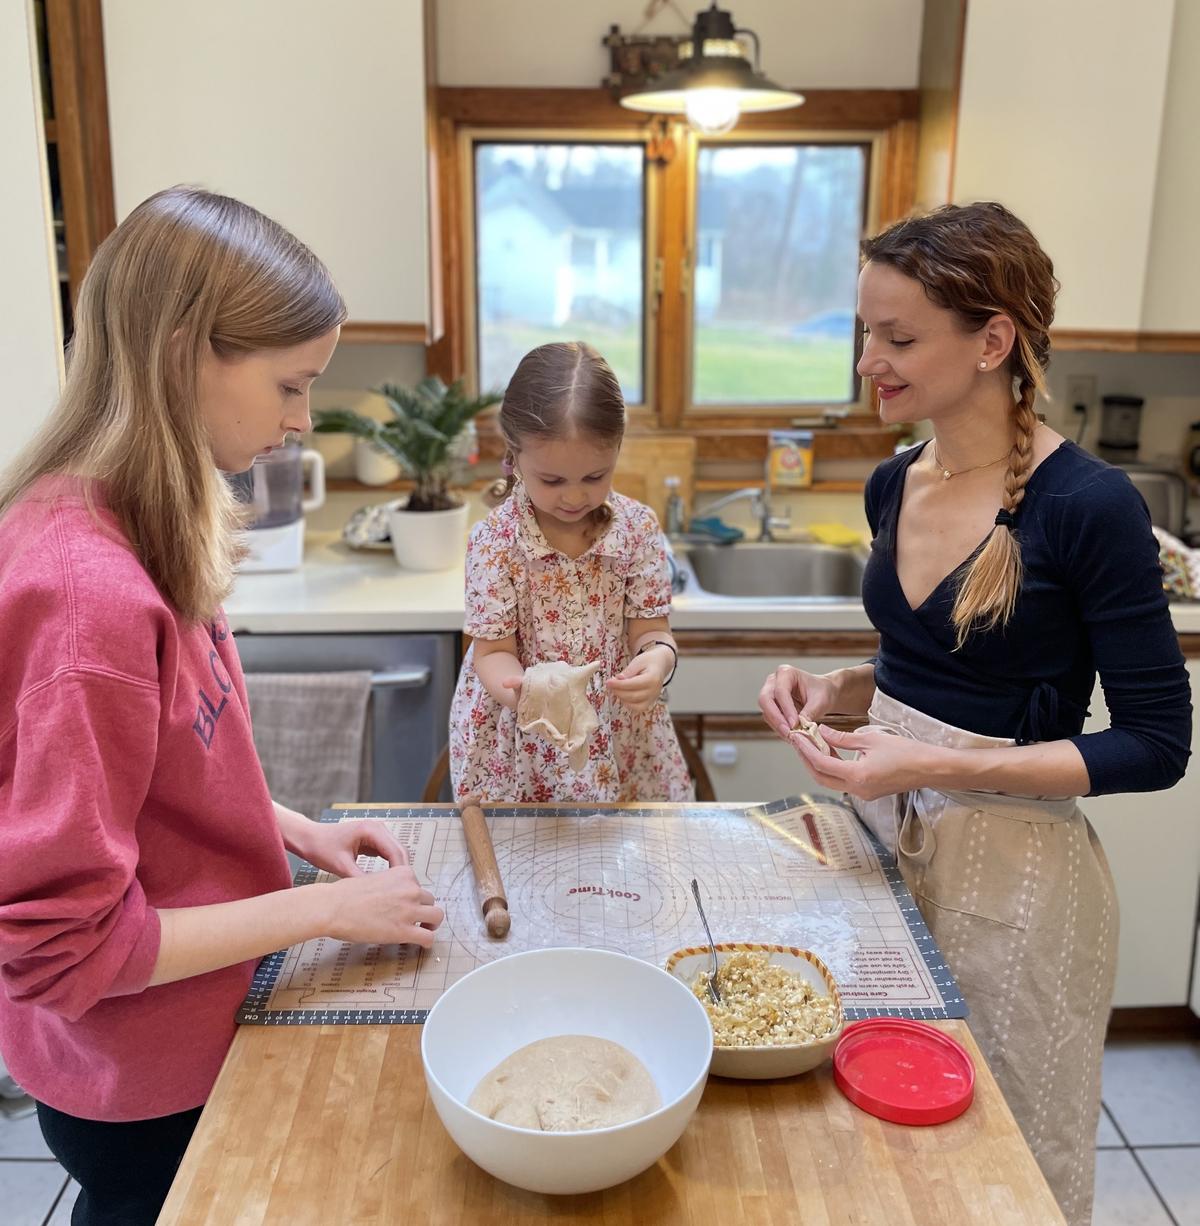 Oleksandra (R) and her daughters, Sofiya (L) and Zlata (C), make varenyky dough. (Courtesy of Cherry Dumaual)